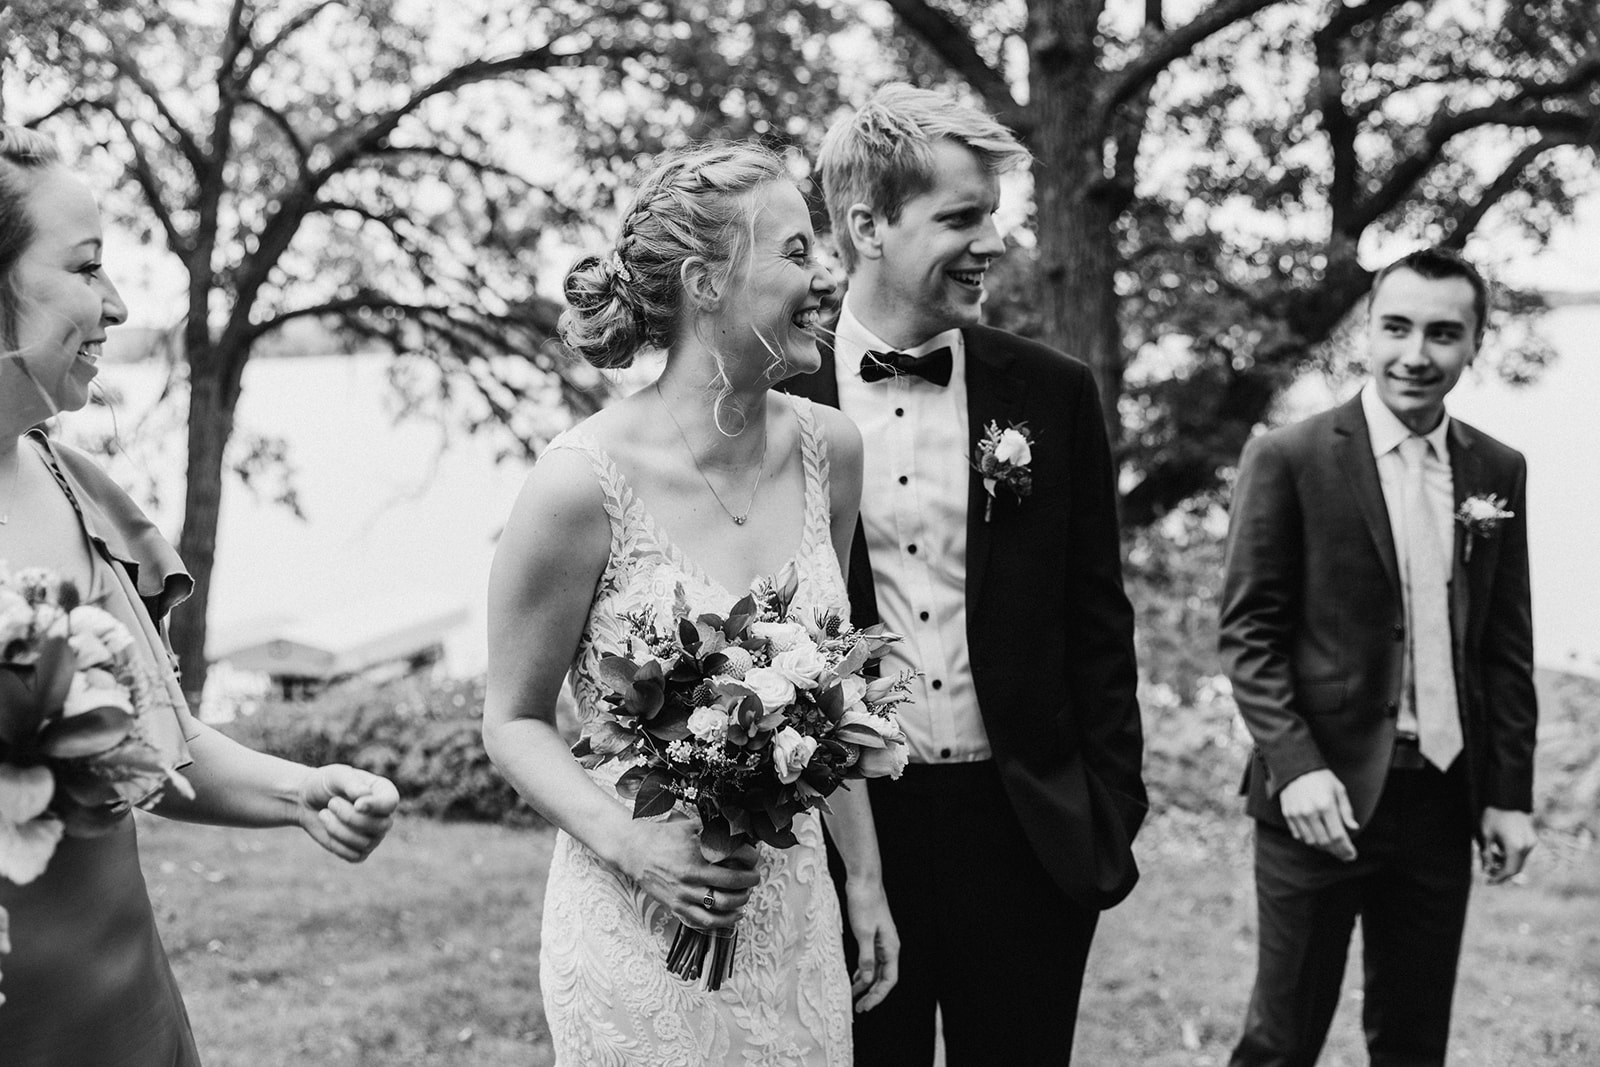 wedding party candids editorial documentary Brianna kirk photography